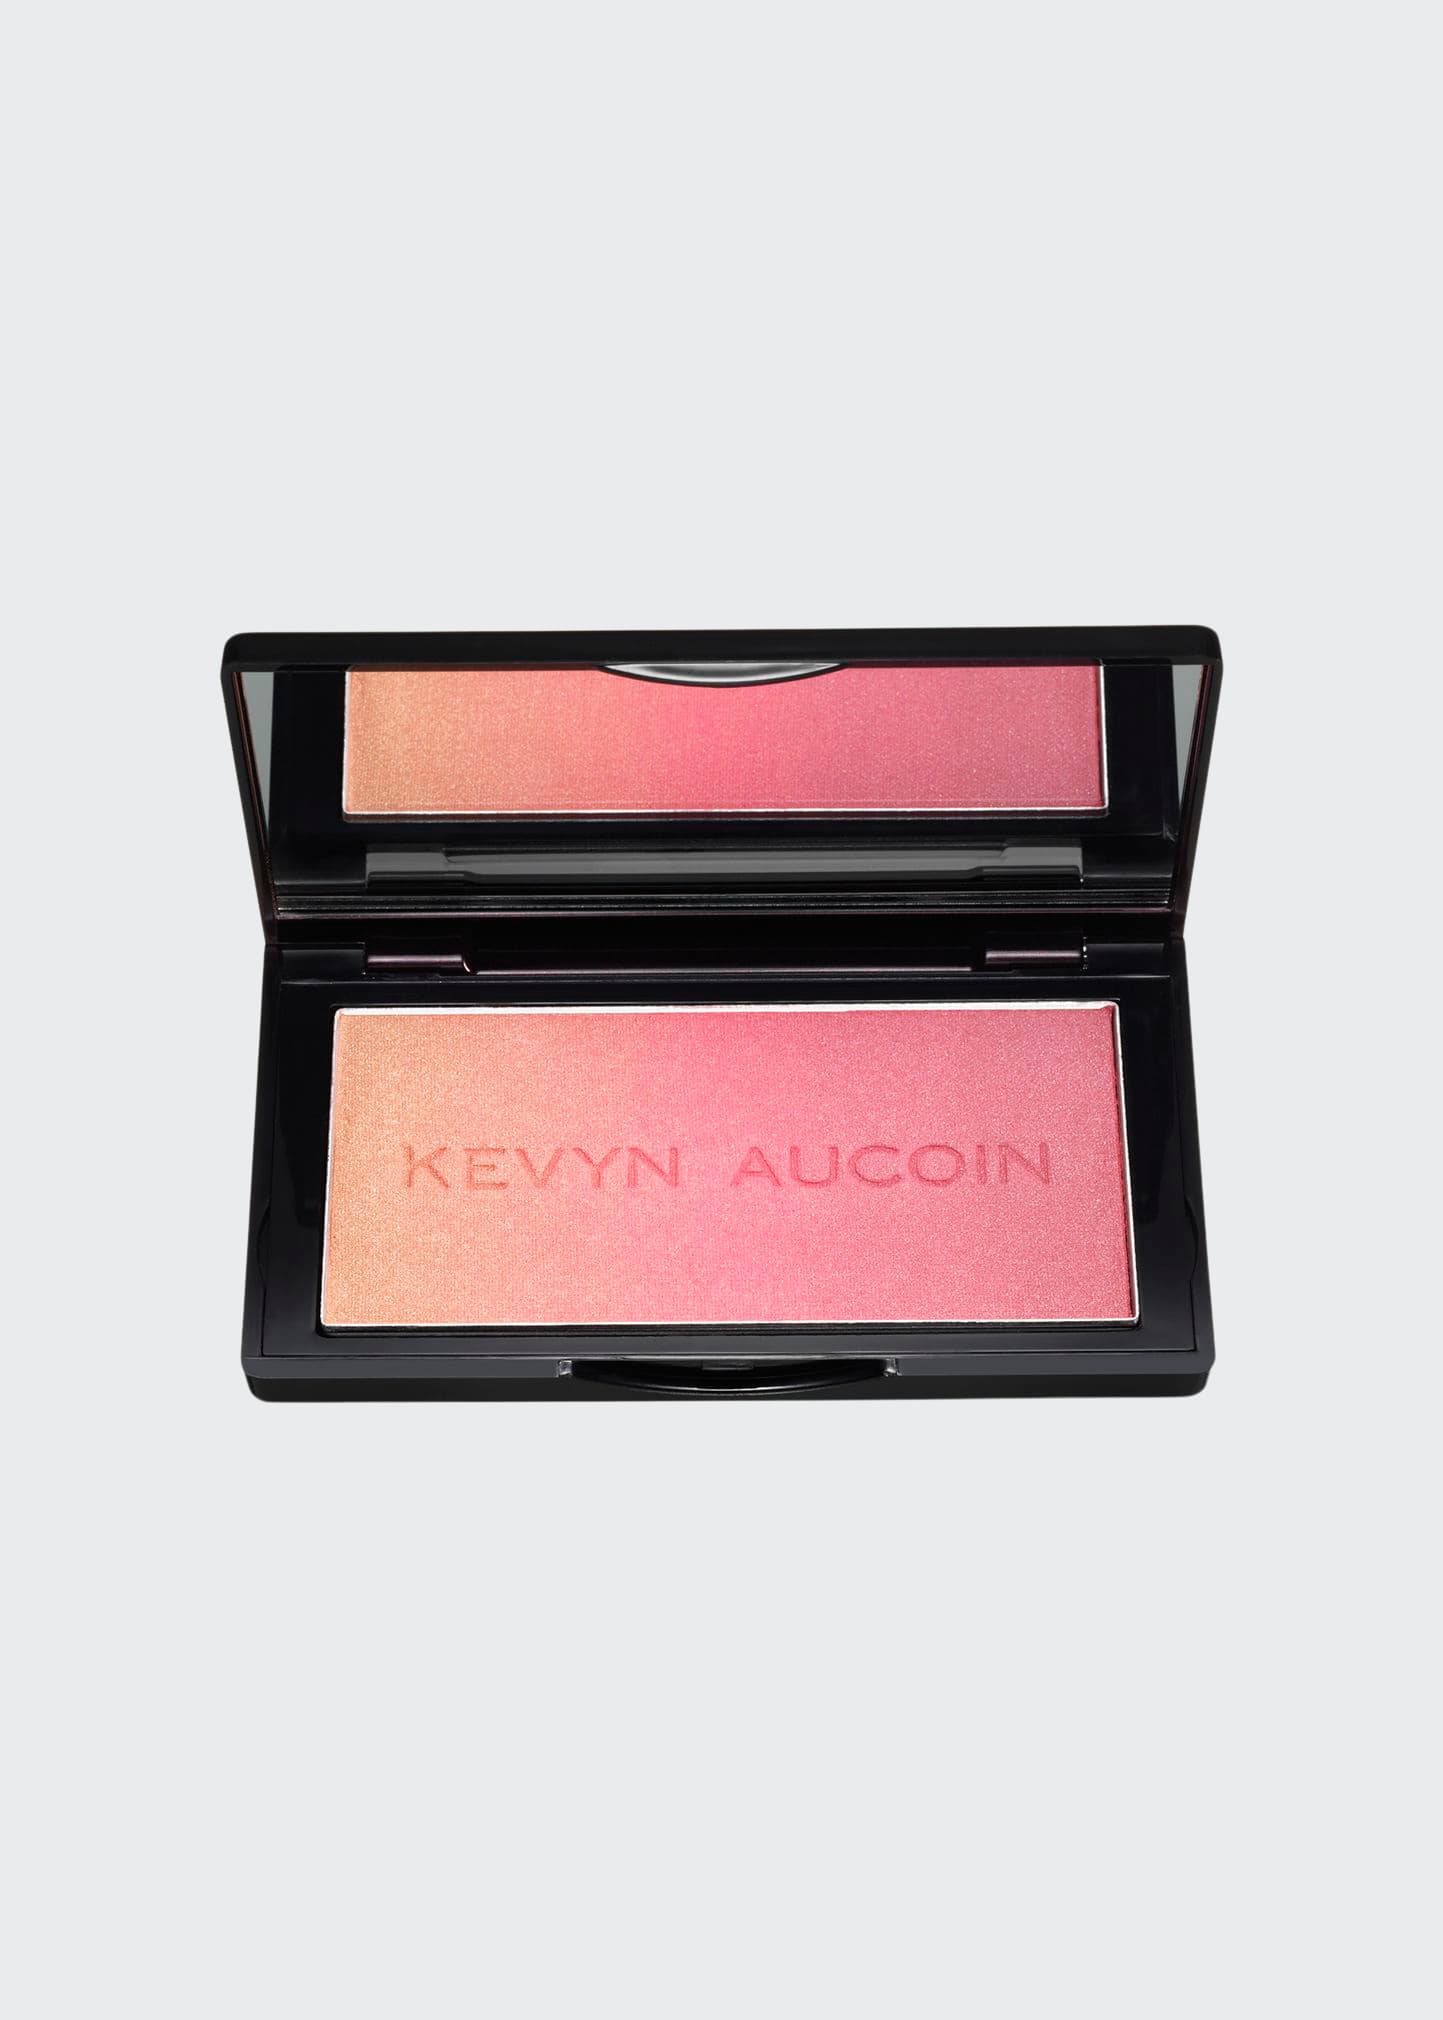 Kevyn Aucoin The Neo-blush In Rose Cliff